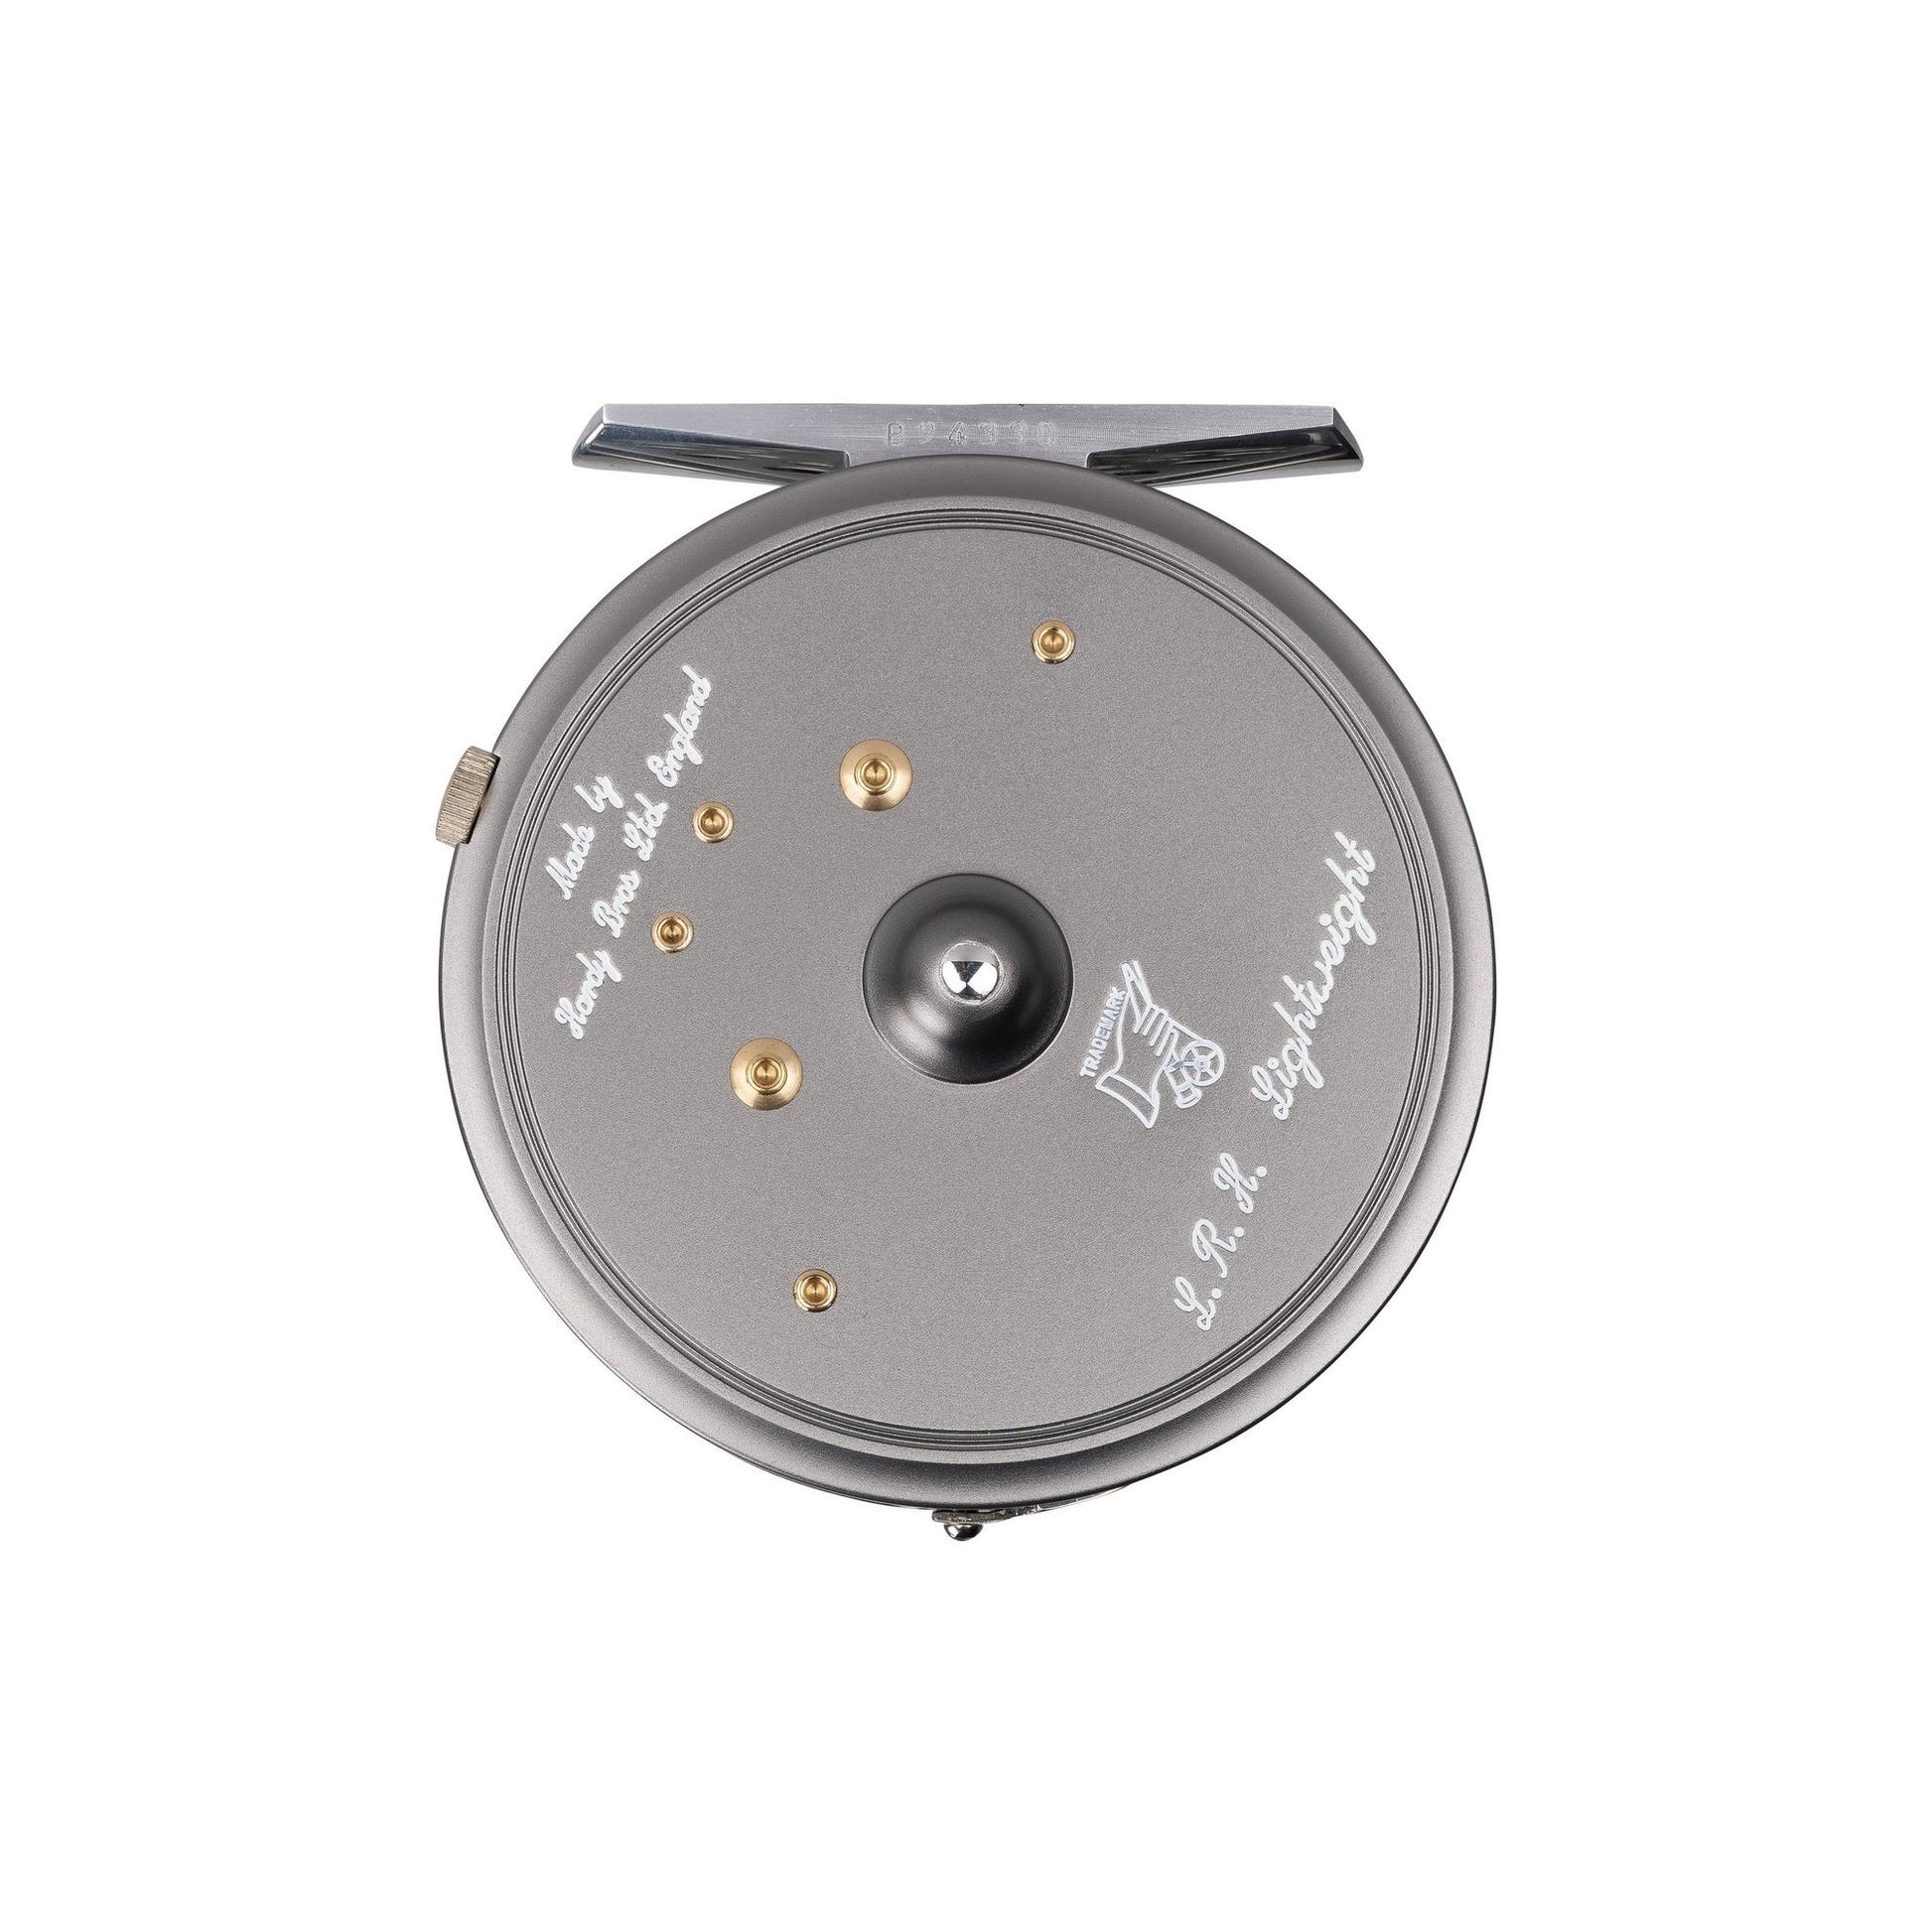 Hardy LRH 5/6/7wt Fly Reel For Sale - Versatile Angling Tool